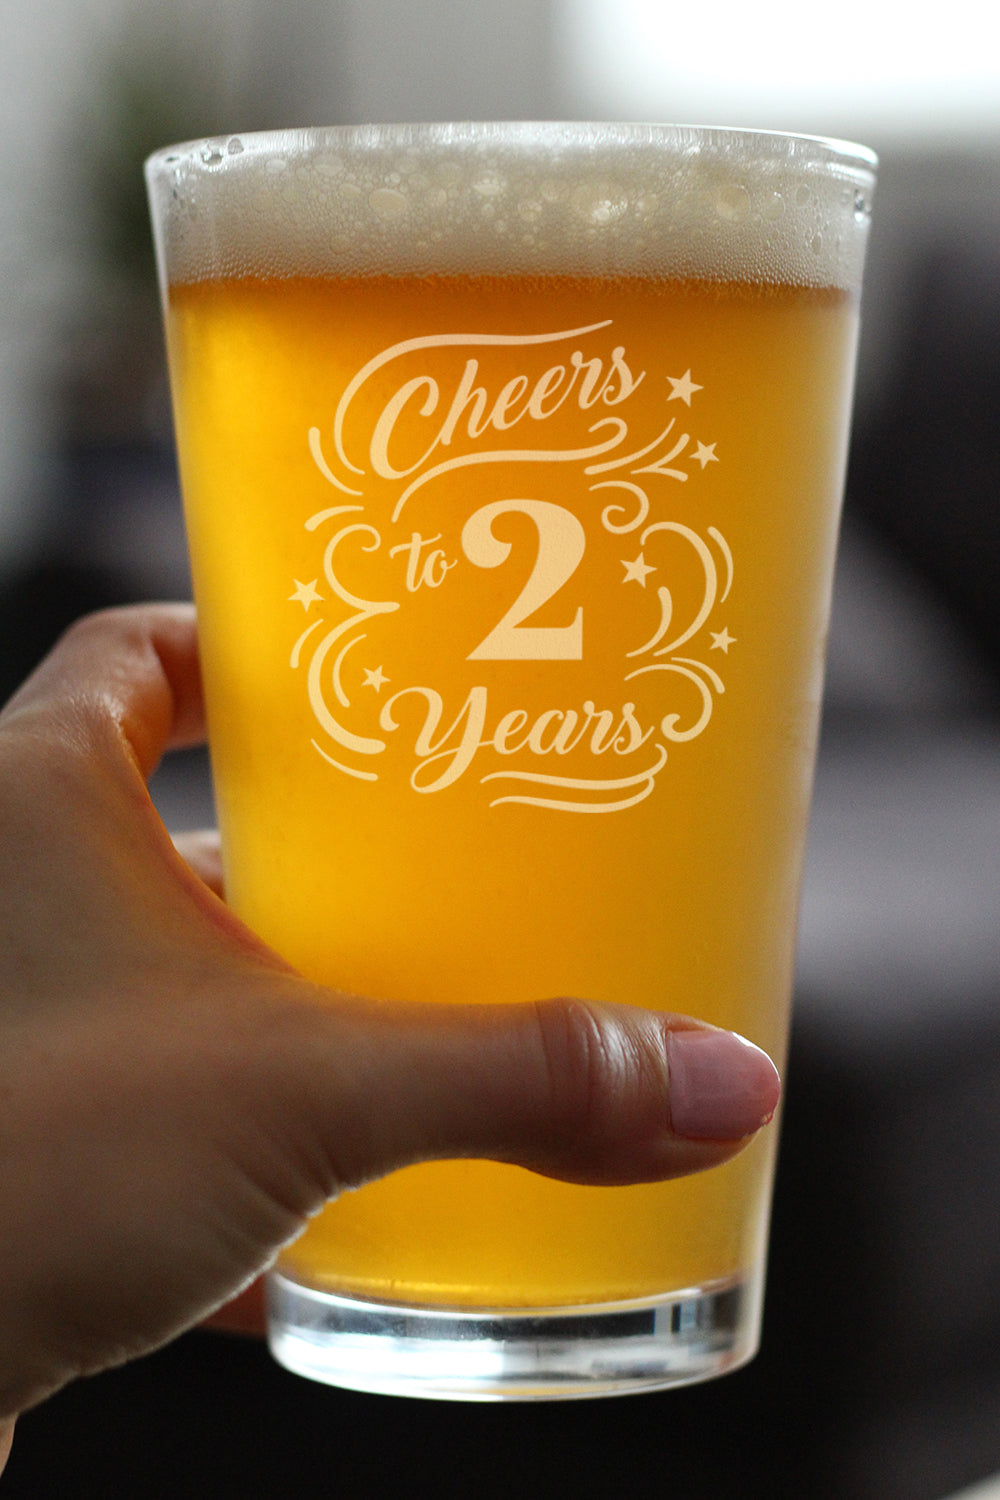 Cheers to 2 Years - Pint Glass for Beer - Gifts for Women &amp; Men - 2nd Anniversary Party Decor - 16 Oz Glasses